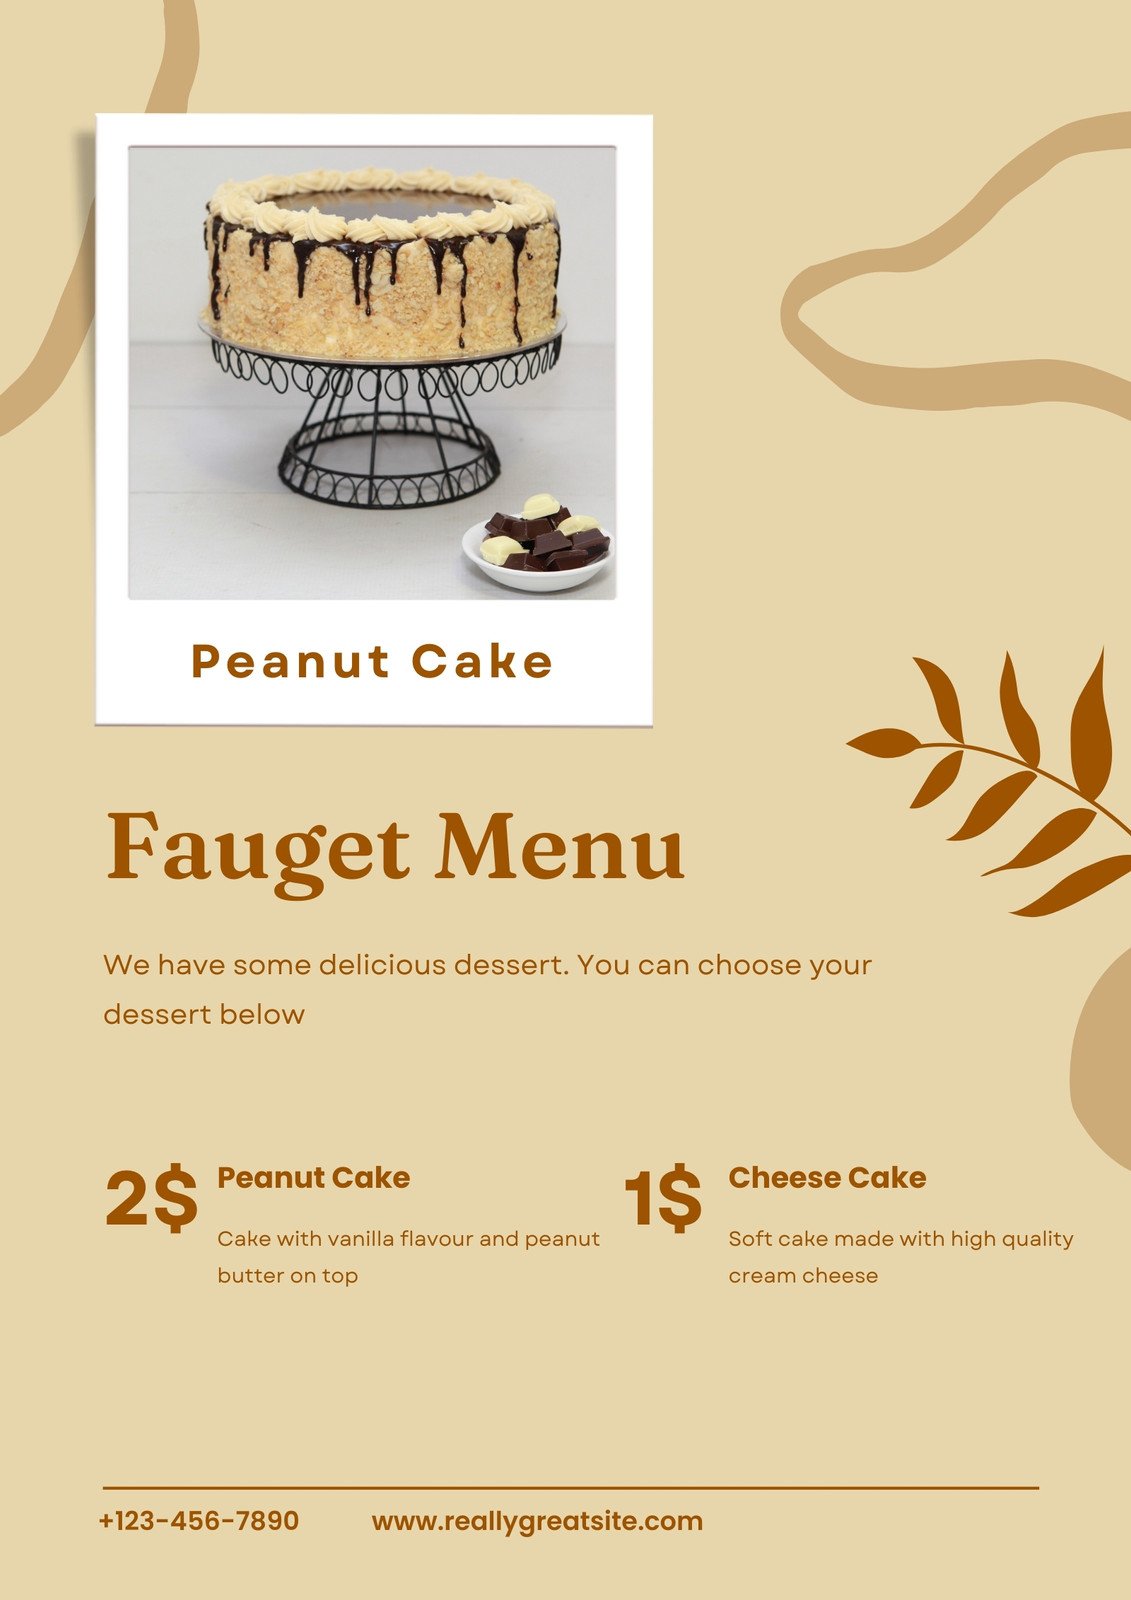 Cakes - Modern Pastry Shop, Inc.